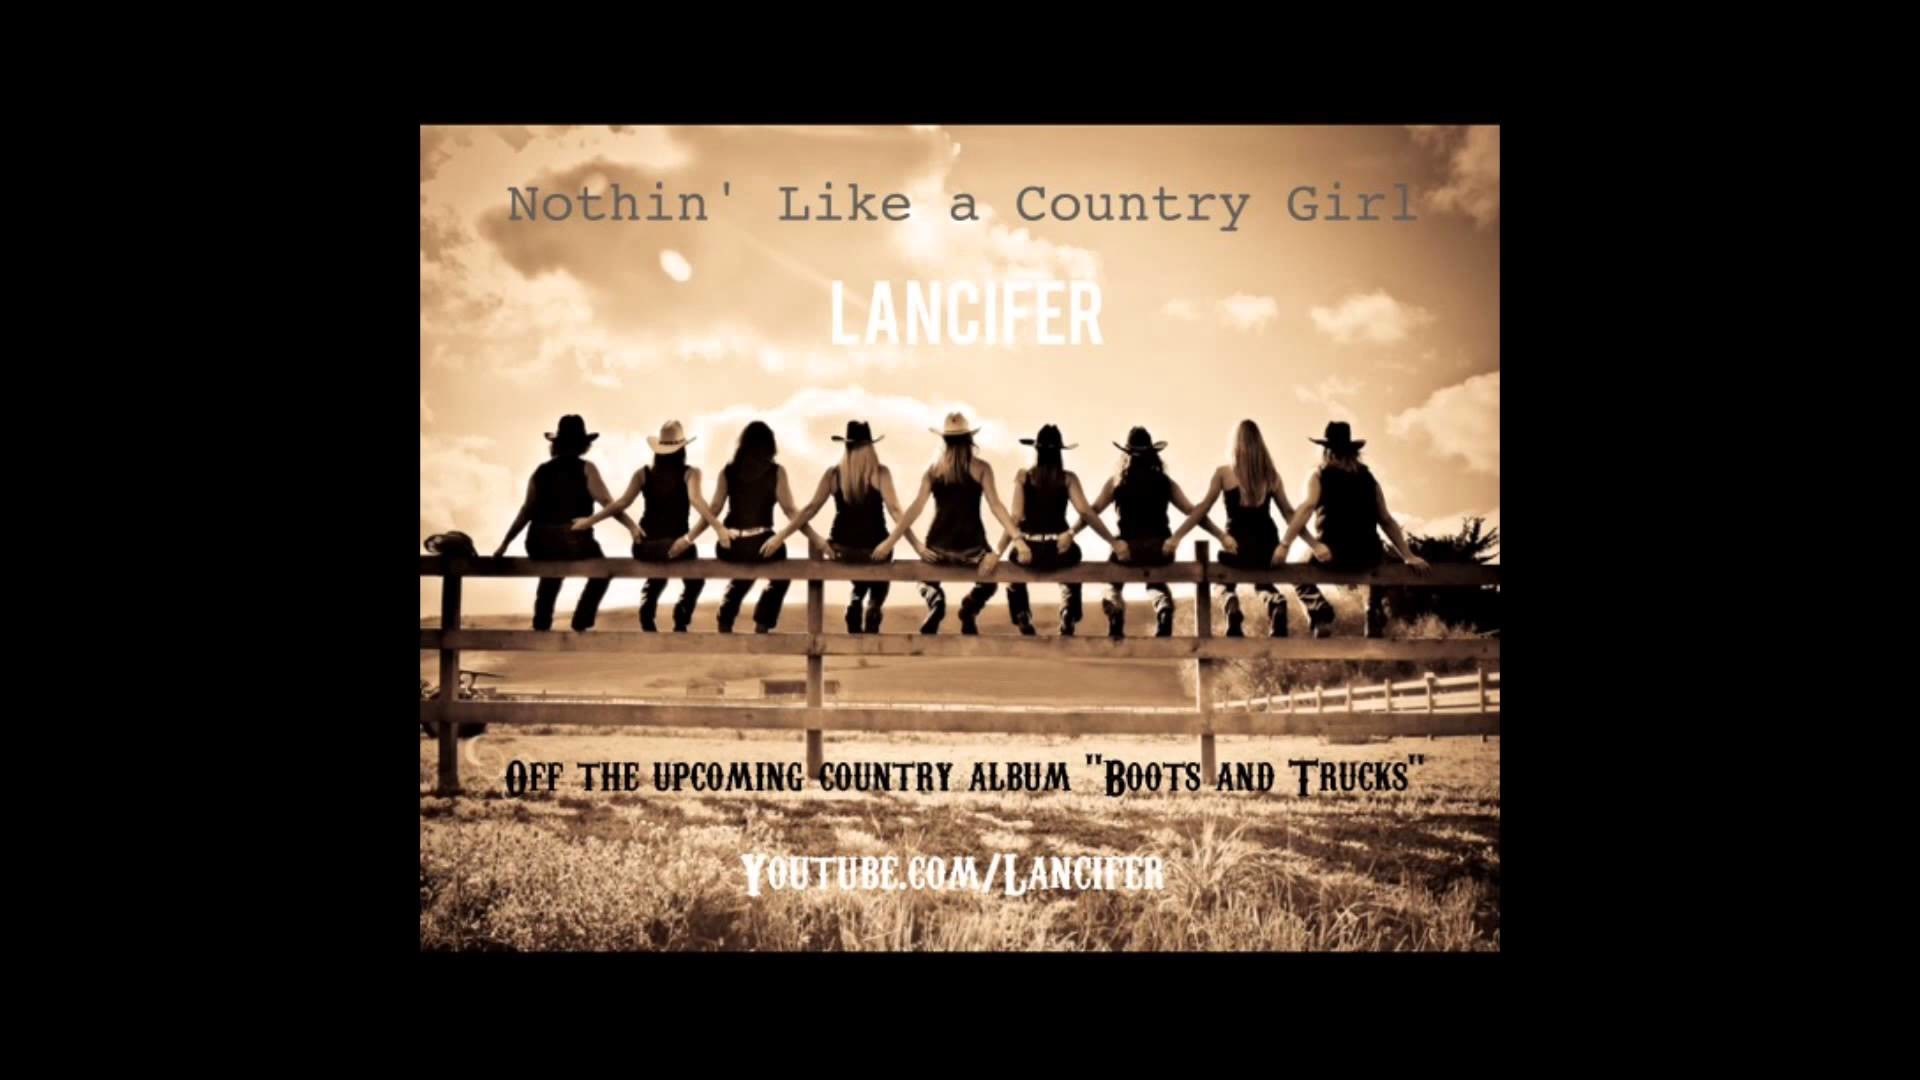 1920x1080 Nothin' Like a Country Girl - Lancifer (from upcoming NEW album "Boots and  Trucks")